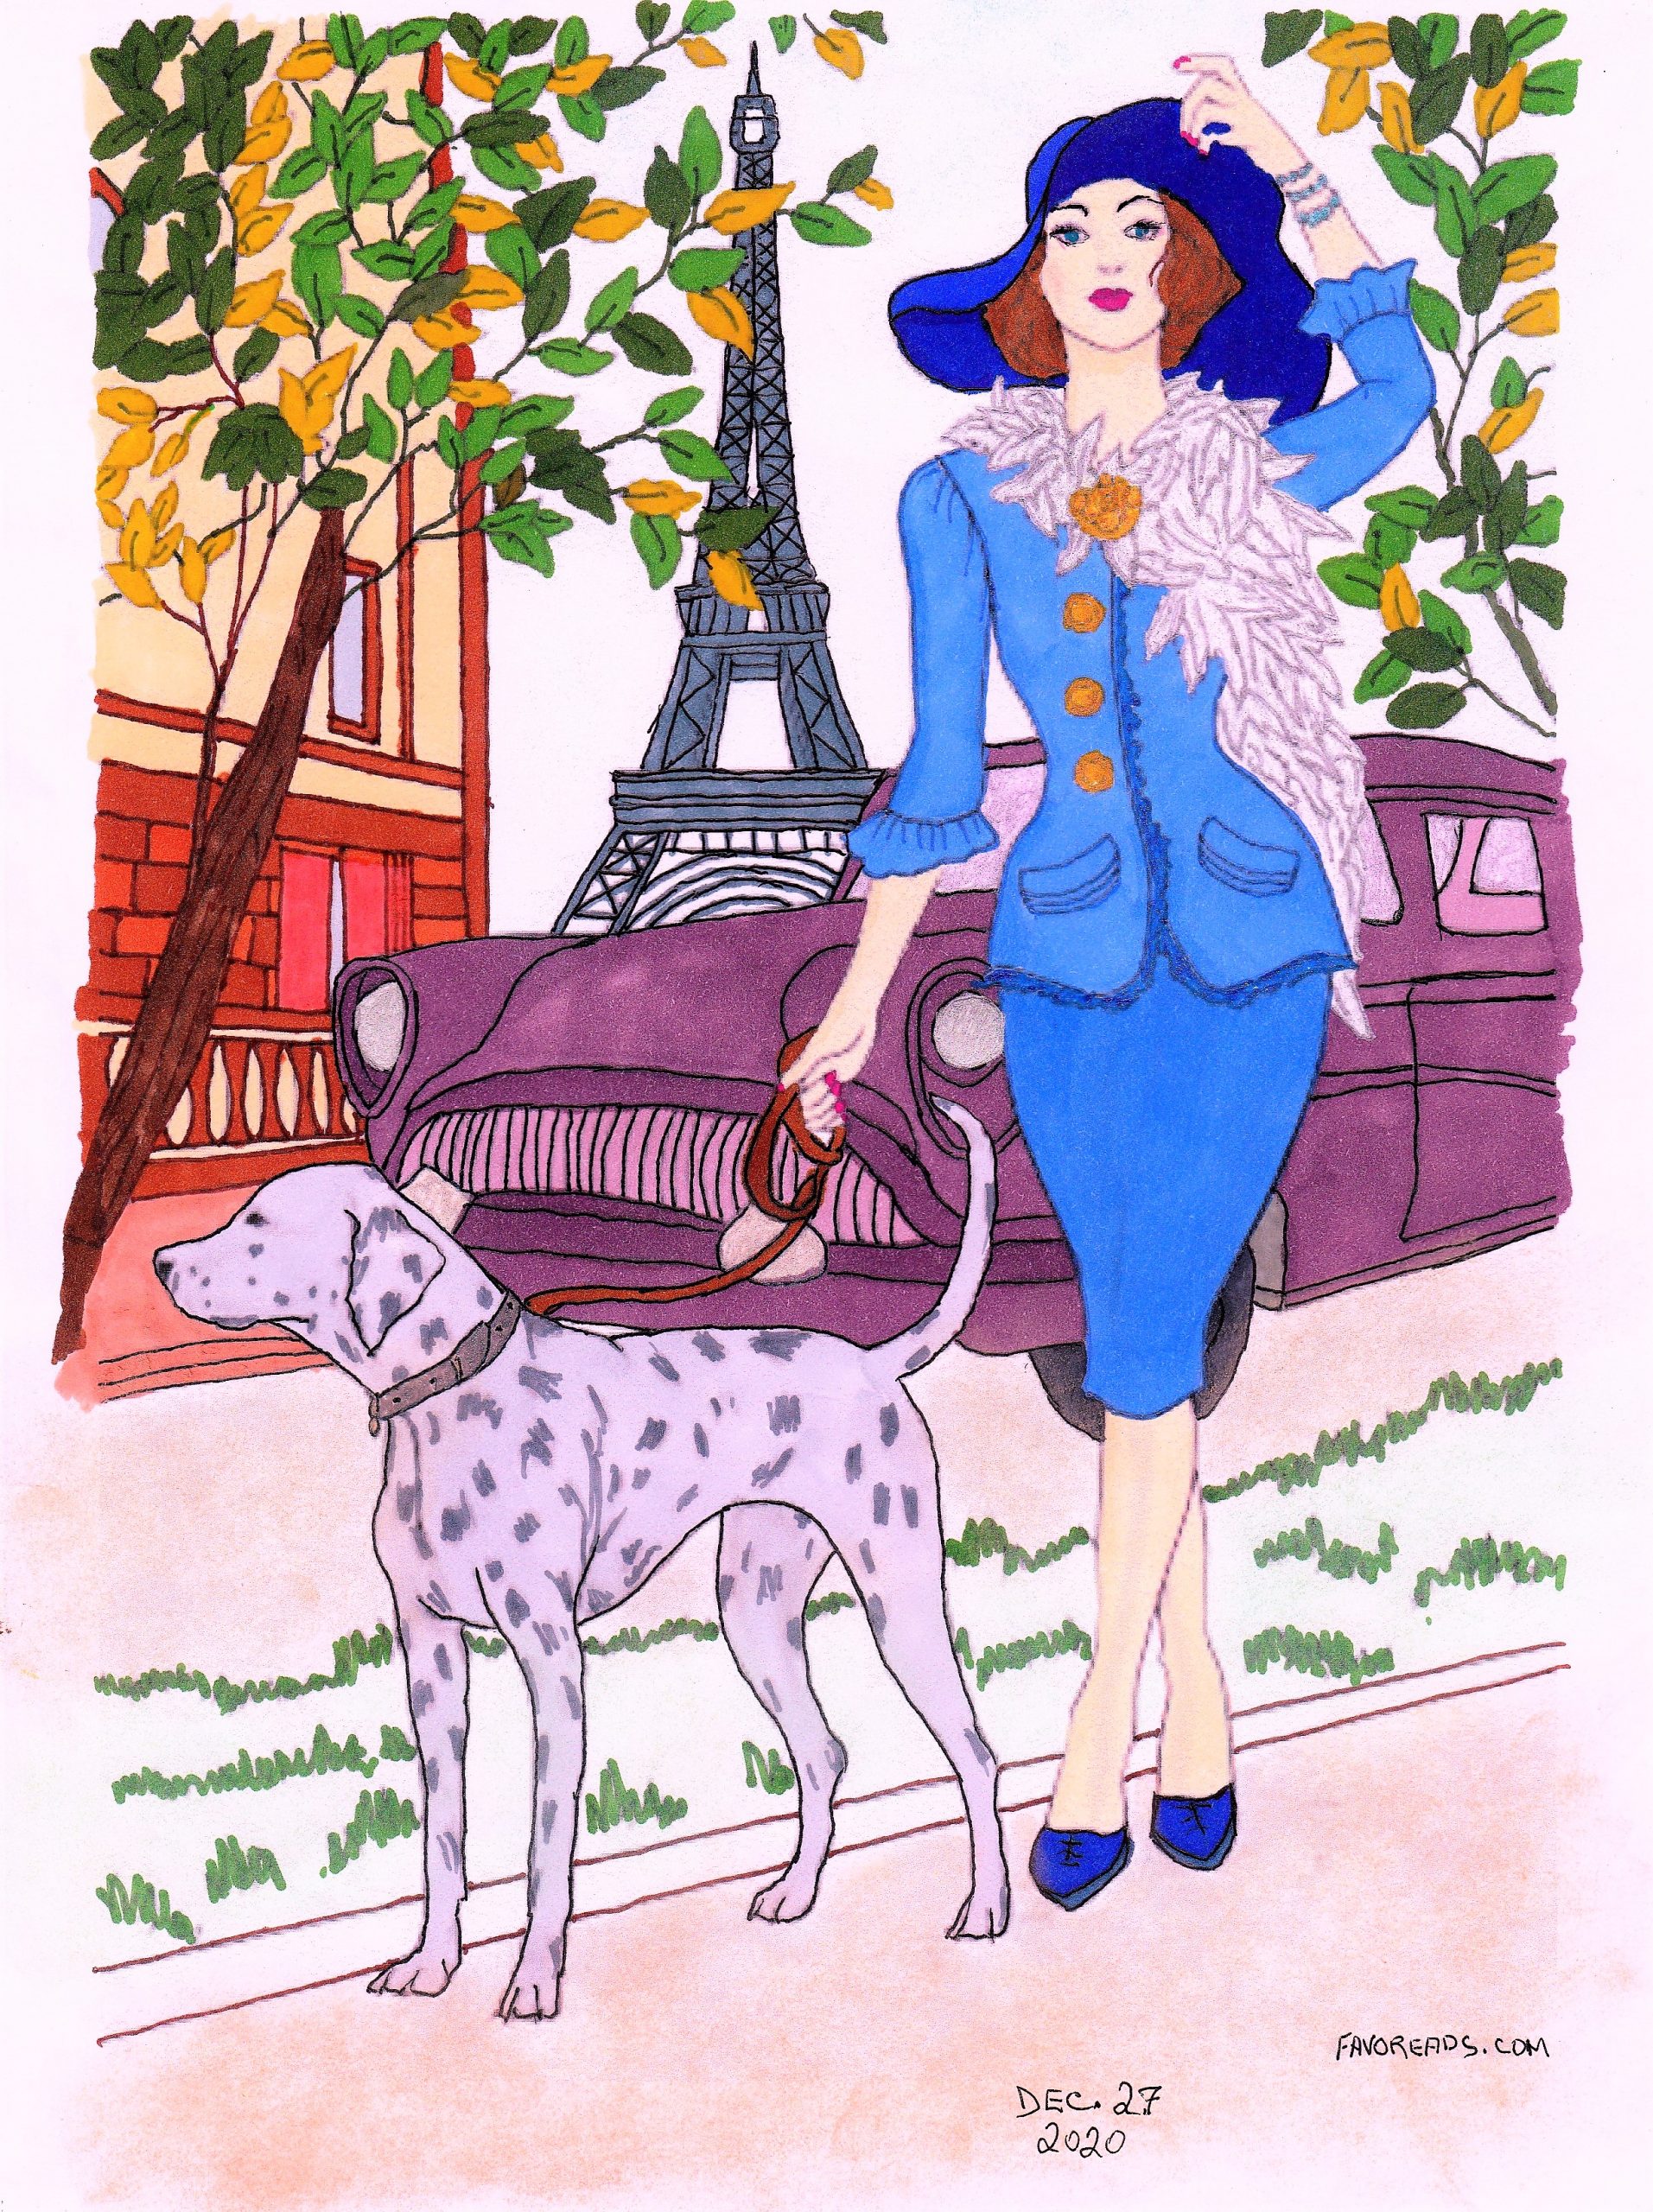 Lady with a Dog